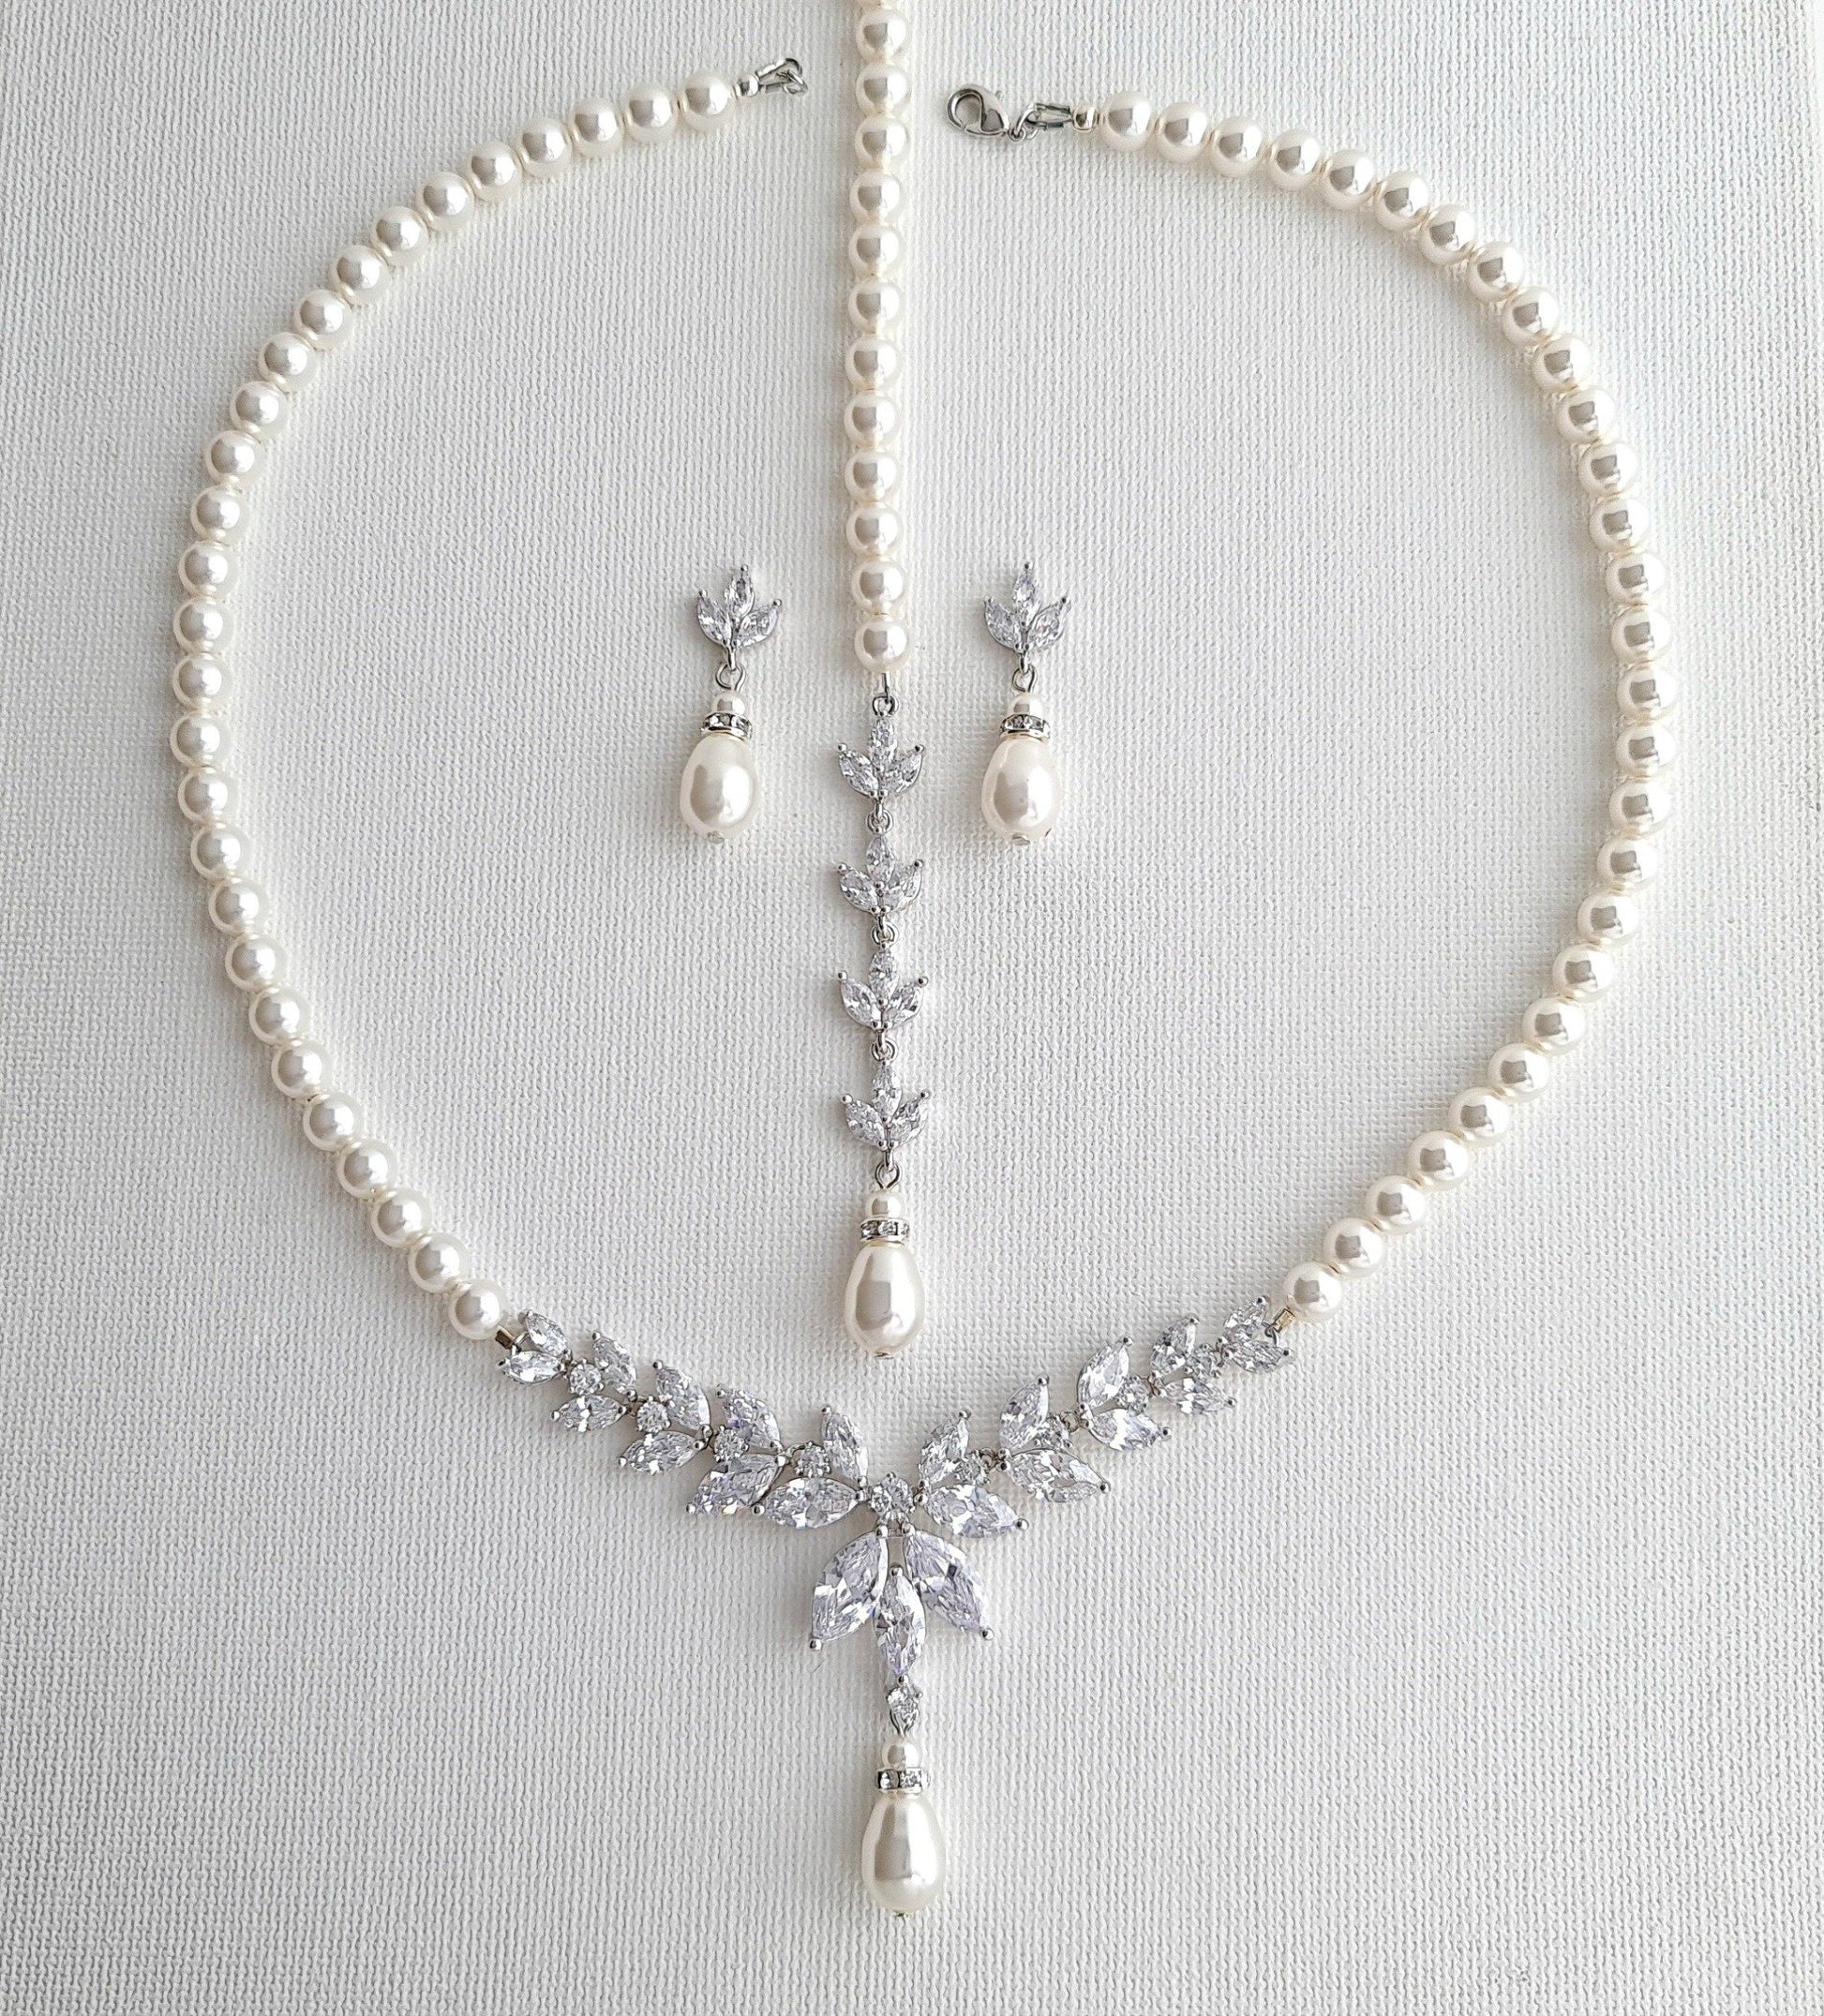 Silver Pearl Necklace and Earrings, Wedding Jewelry Set 